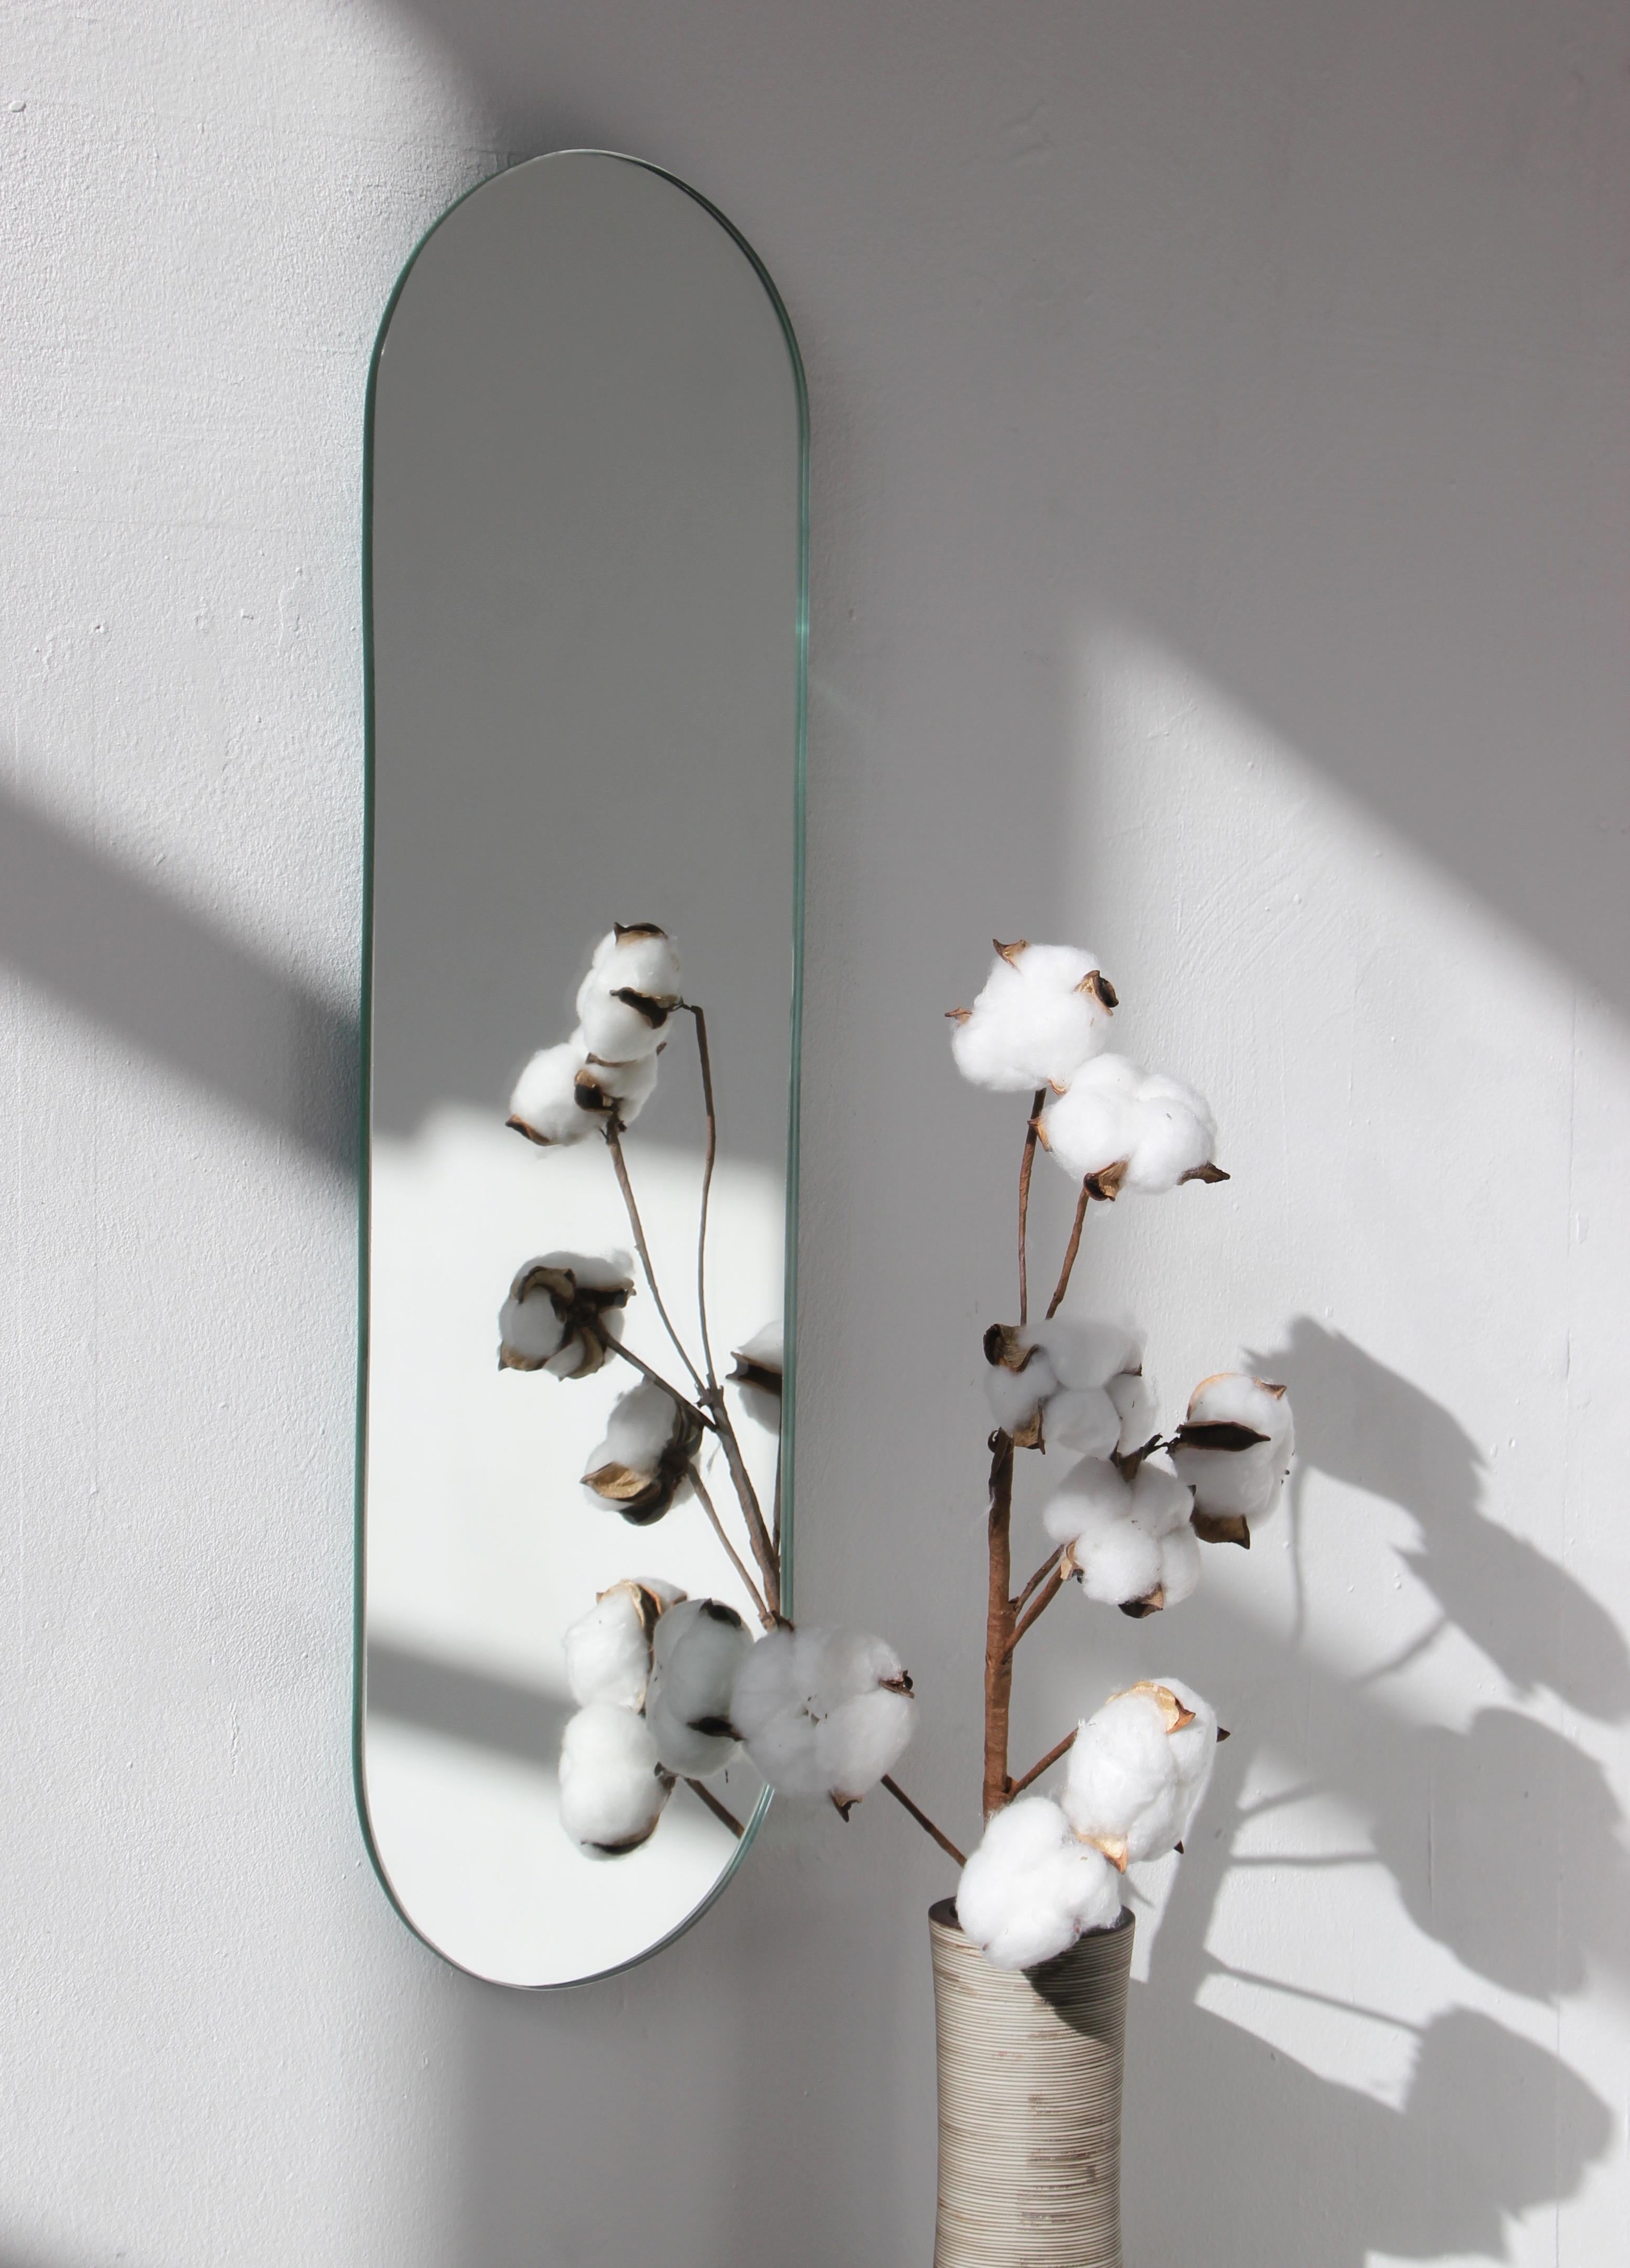 Minimalist Capsula™ capsule / pill shaped frameless mirror. Quality design that ensures the mirror sits perfectly parallel to the wall. Designed and made in London, UK.

Fitted with professional plates not visible once installed for an easy and safe